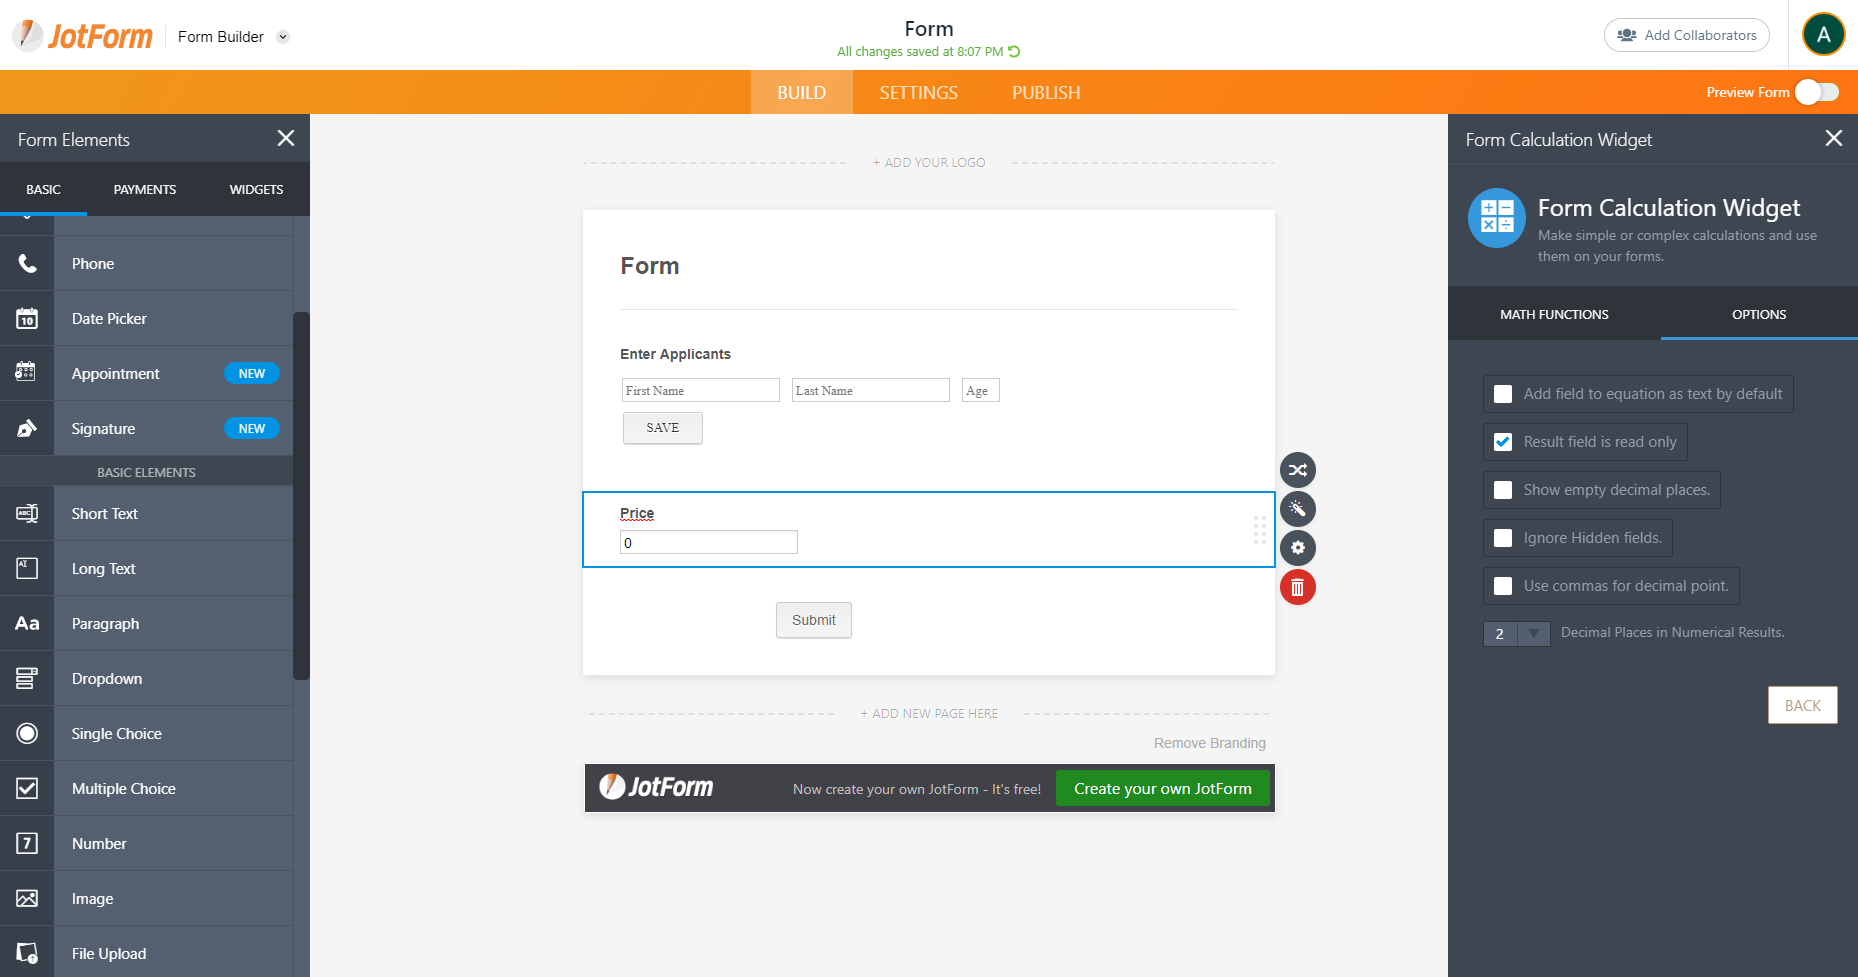 Can you add multiple registrations on one form? Image 3 Screenshot 102